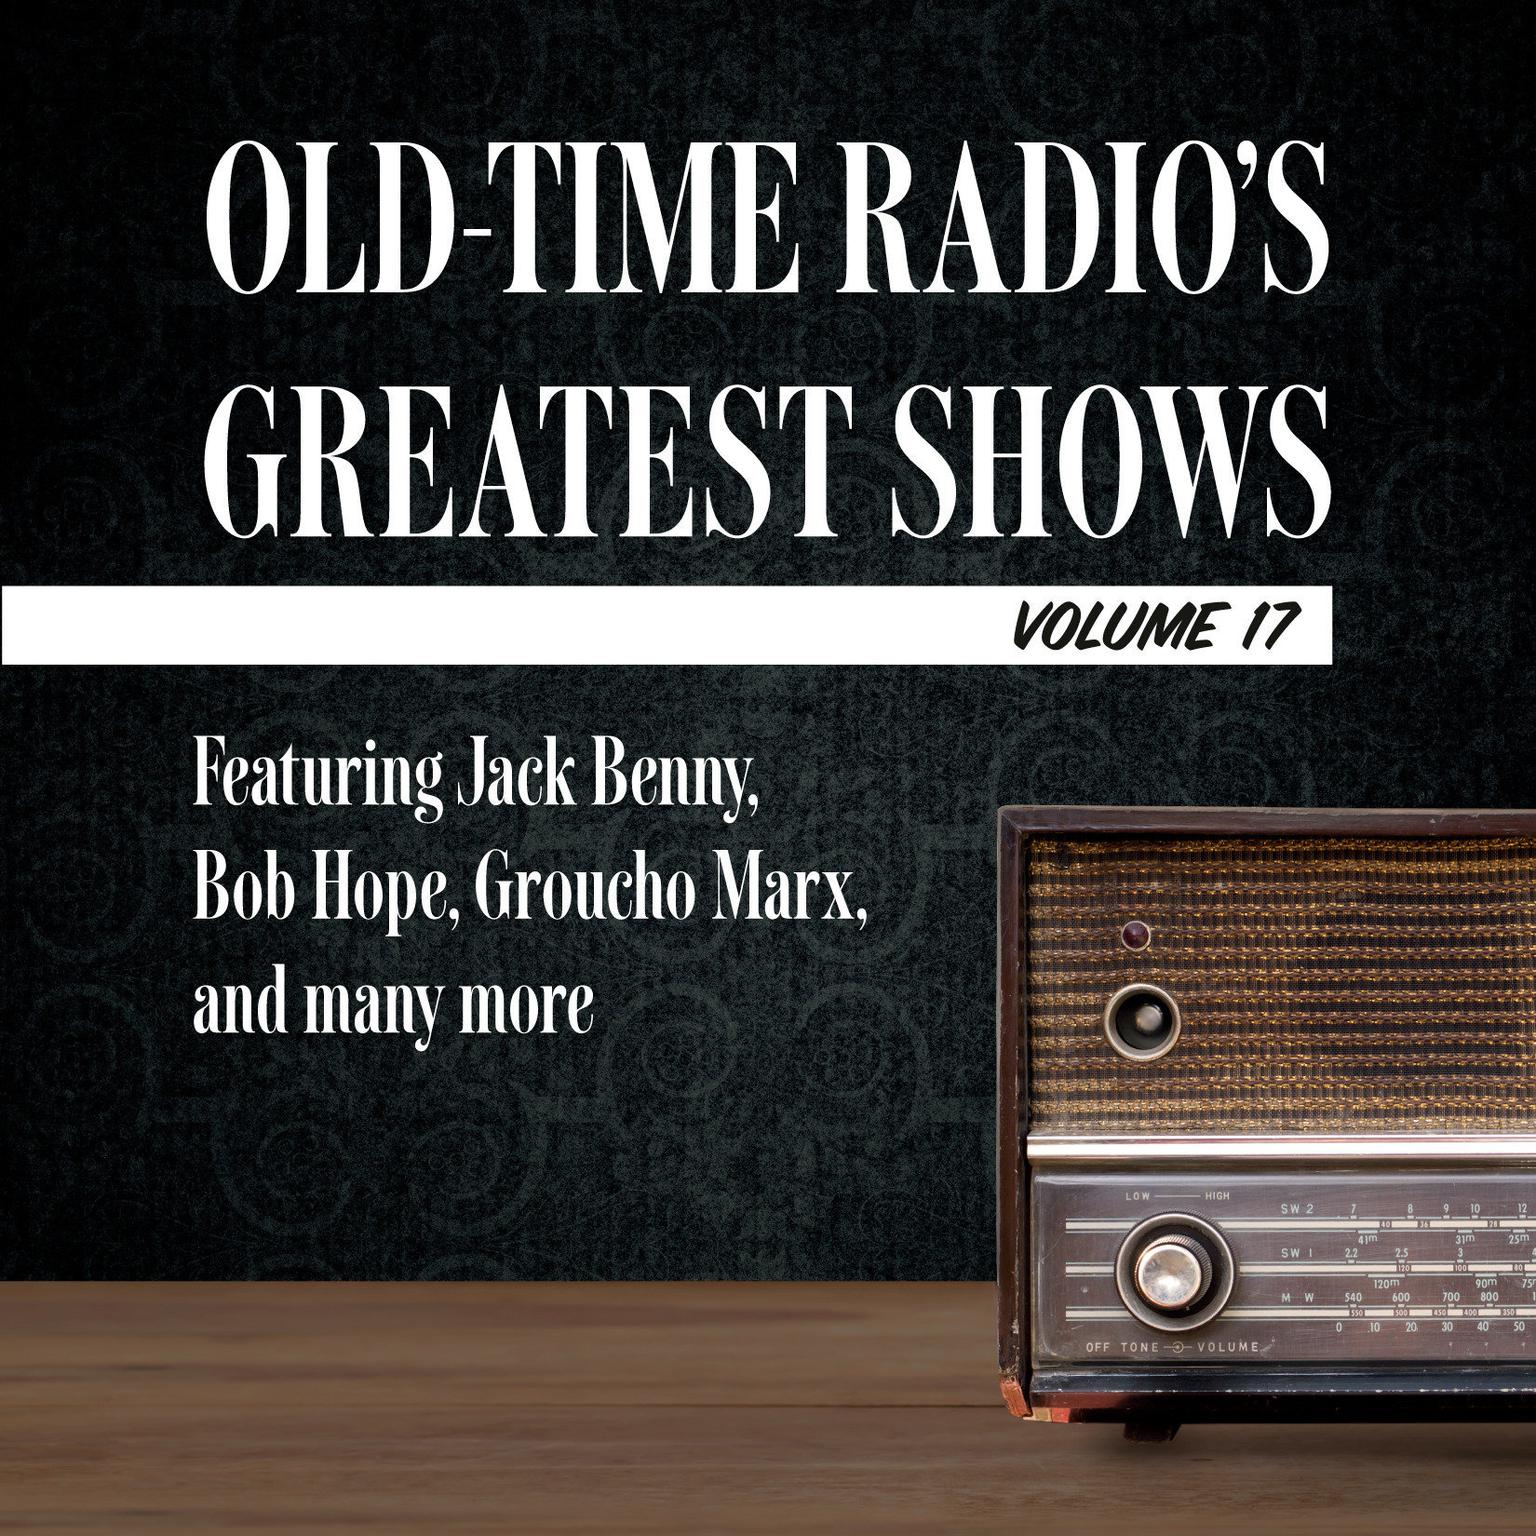 Old-Time Radios Greatest Shows, Volume 17: Featuring Jack Benny, Bob Hope, Groucho Marx, and many more Audiobook, by Carl Amari